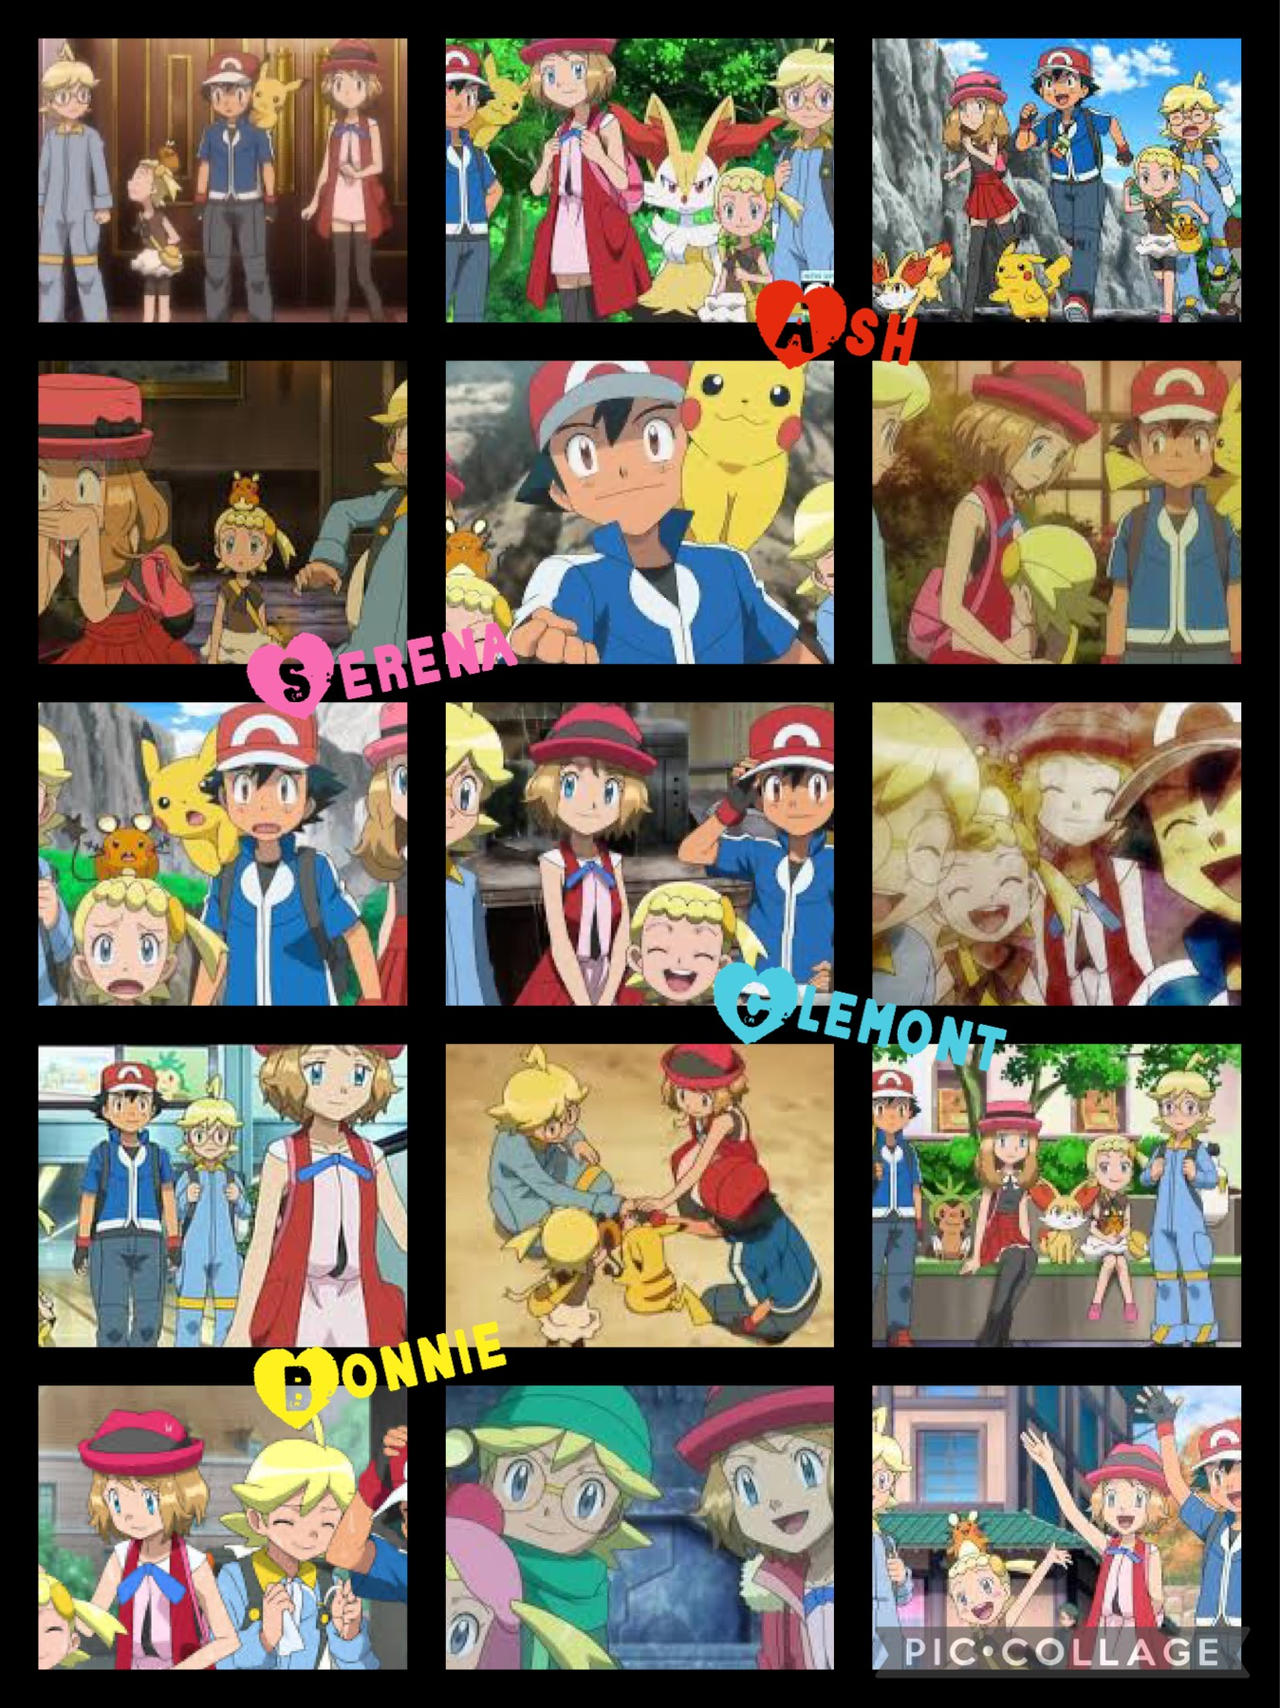 I love how Journeys had the Kalos gang working towards their goals